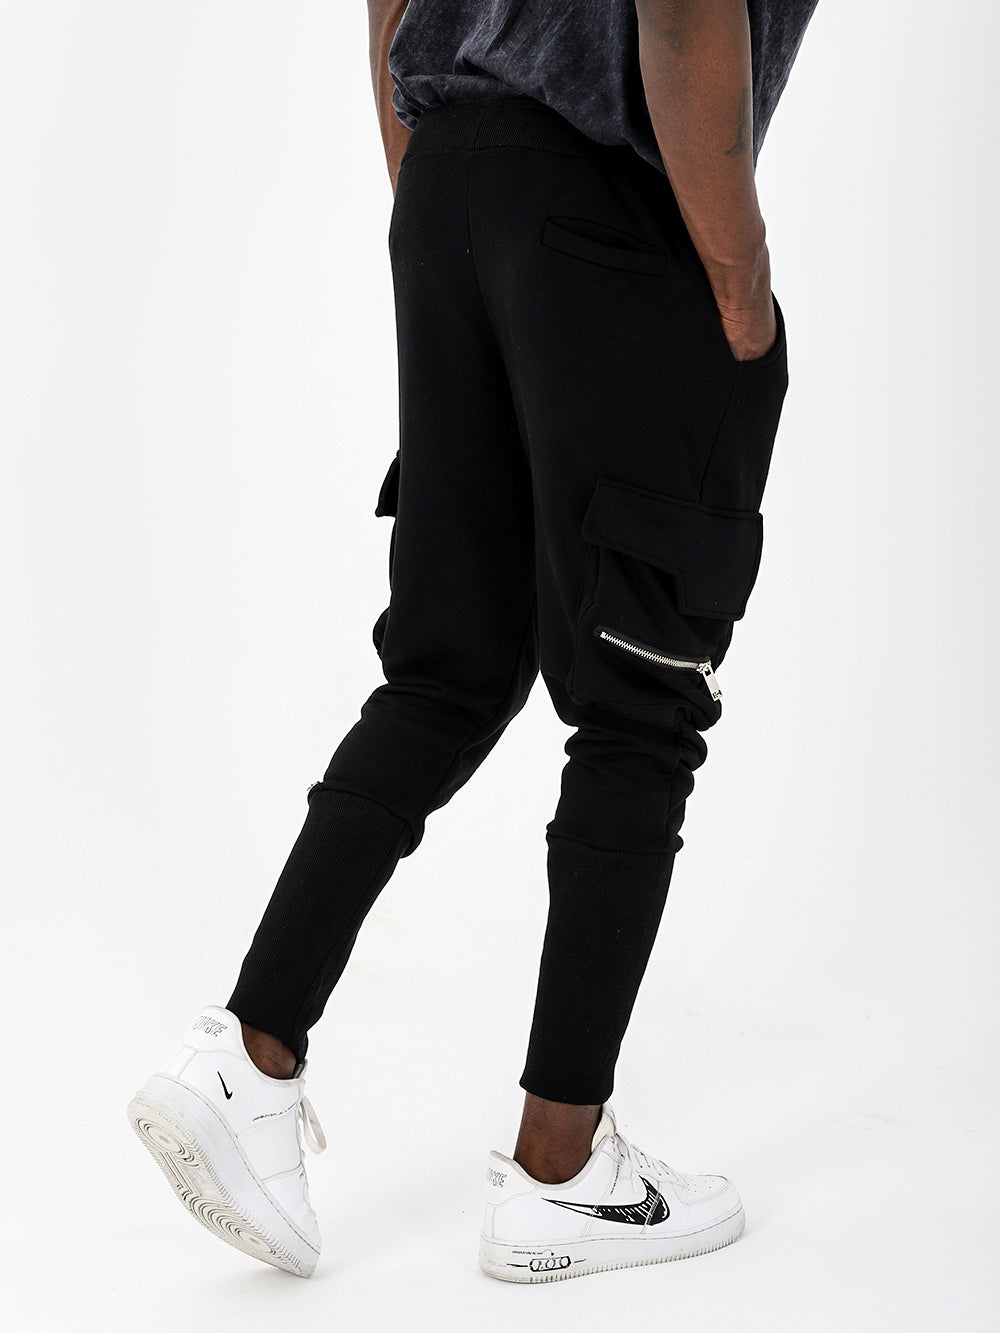 A man wearing comfortable black RAMBO joggers with pockets, paired with stylish white sneakers.